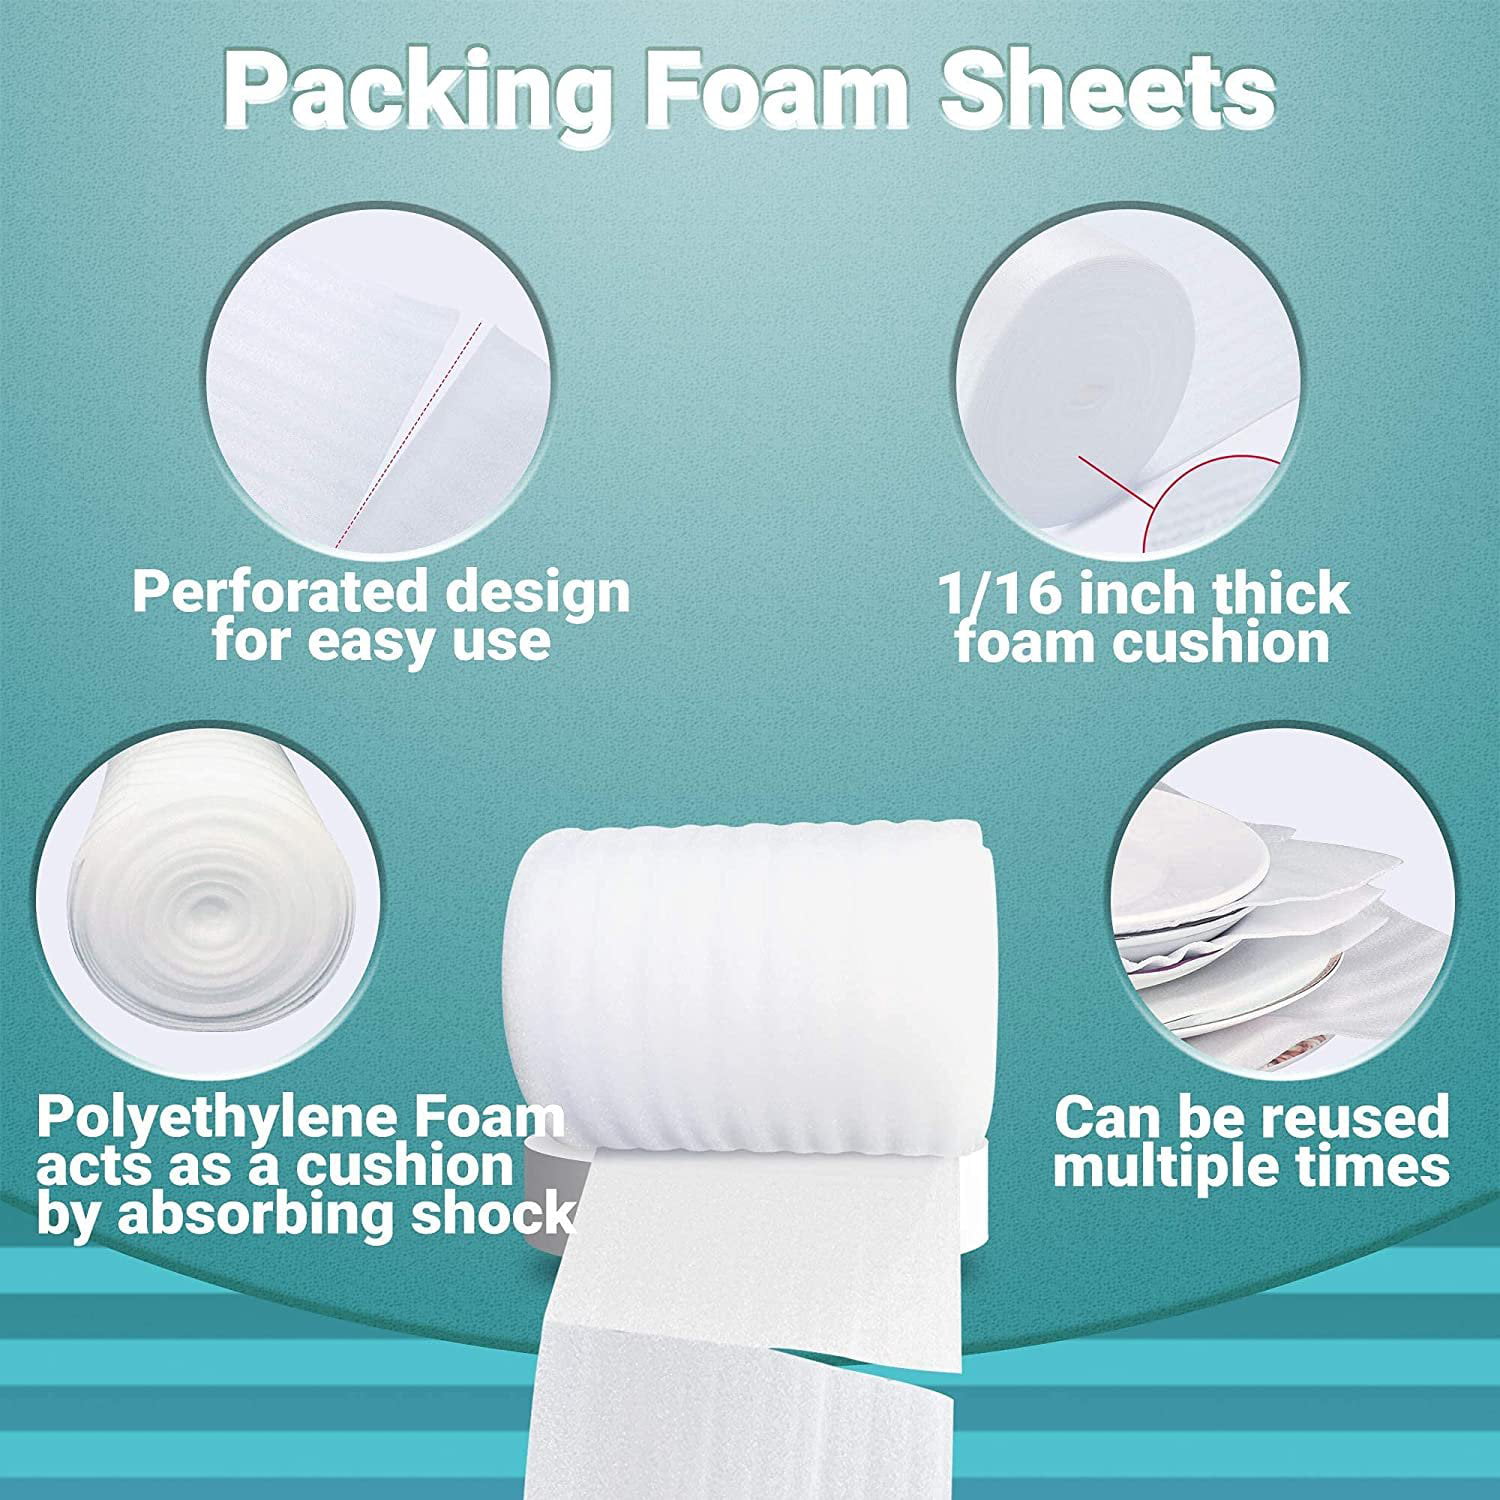 12x60WT New 6 Rolls of Foam Wrap 12 x 60' Feet. Packing Foam Sheets 12 x  12 Packing Supplies for Moving, Storing, Shipping. Foam Wrap Moving  Supplies. Perfect for Dishes, Glasses, Fragile